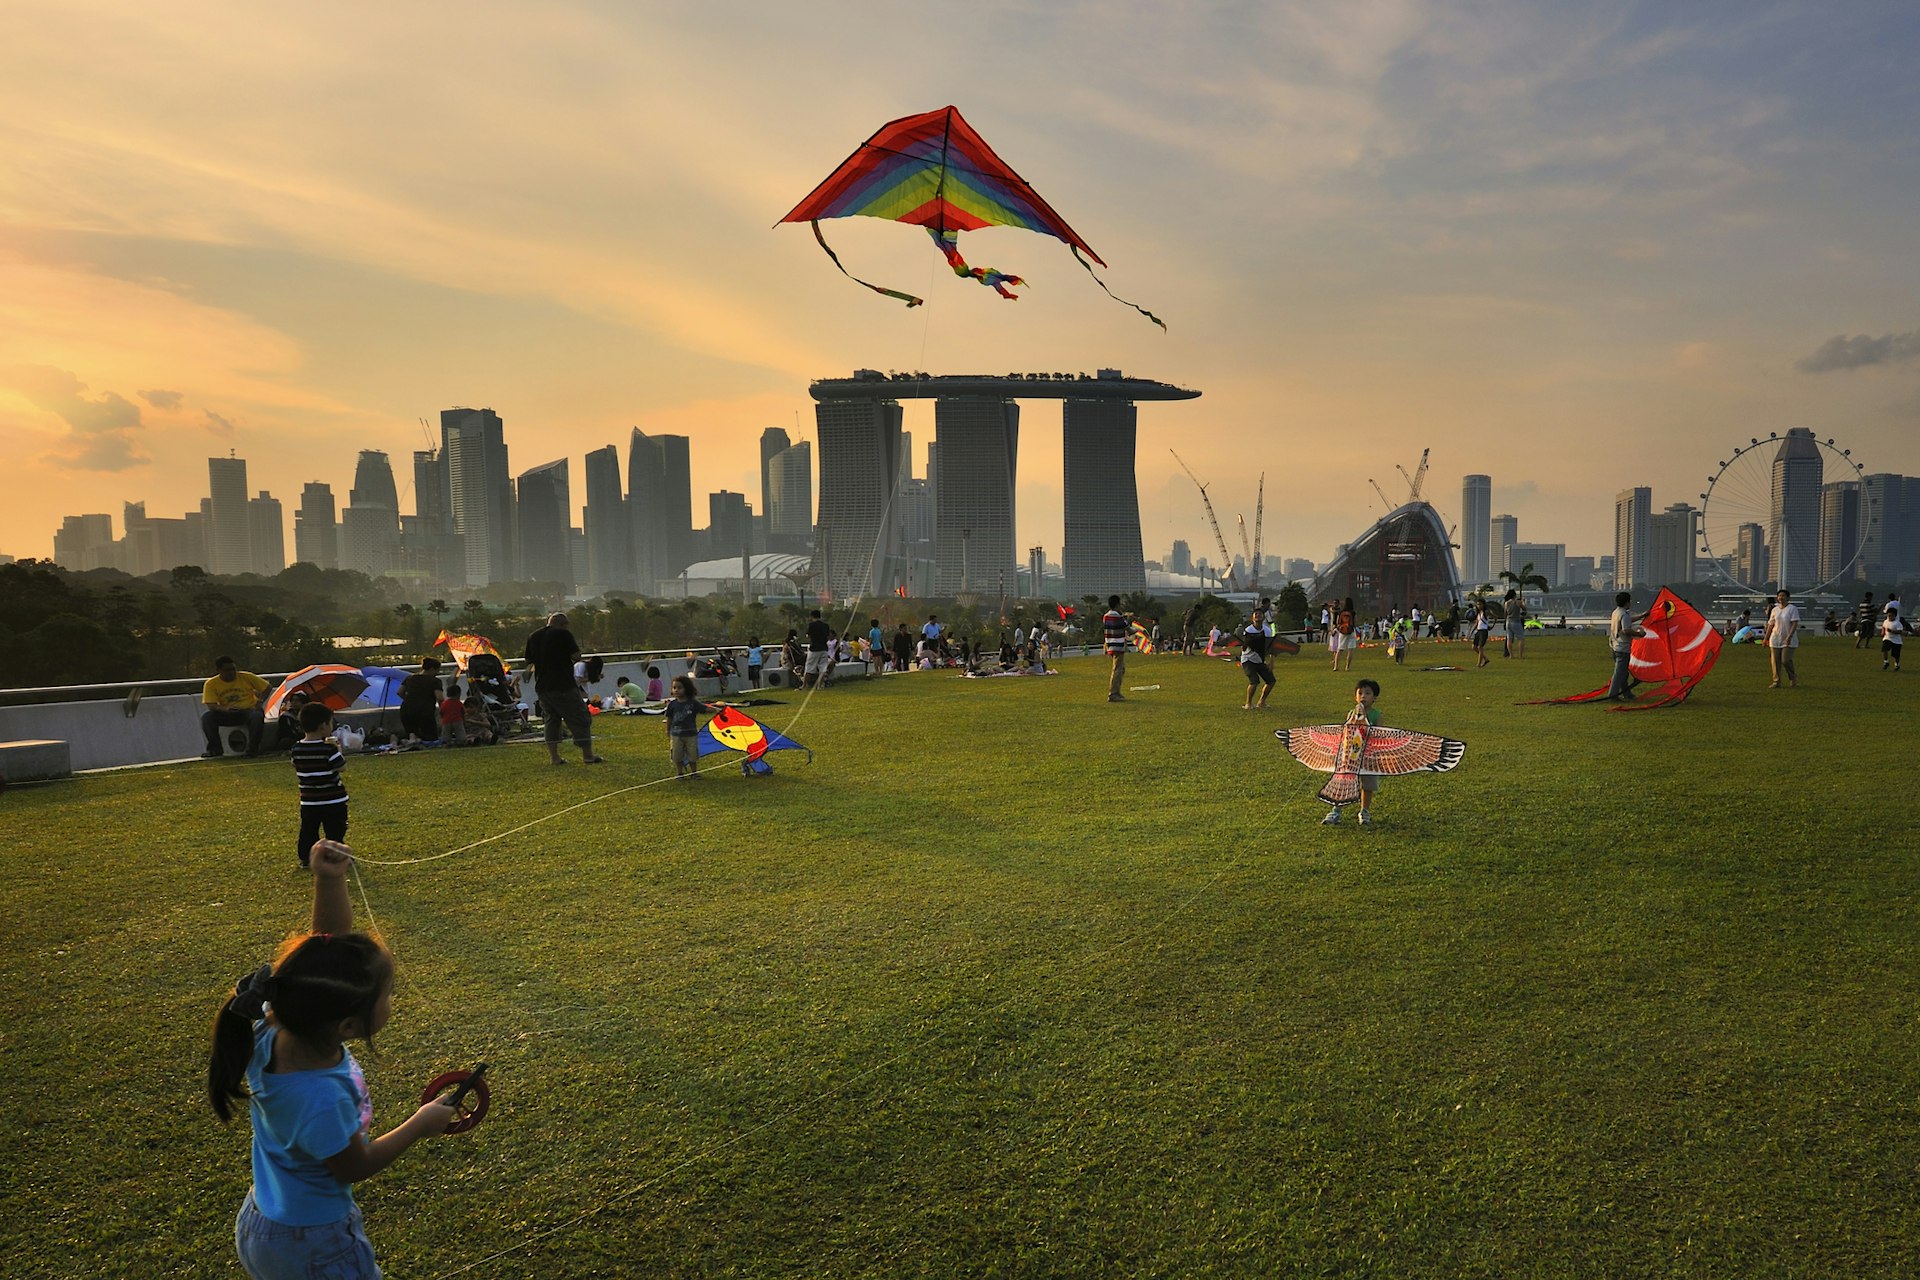 A view of Marina Bay Sands at sunset with children flying kites in the foreground